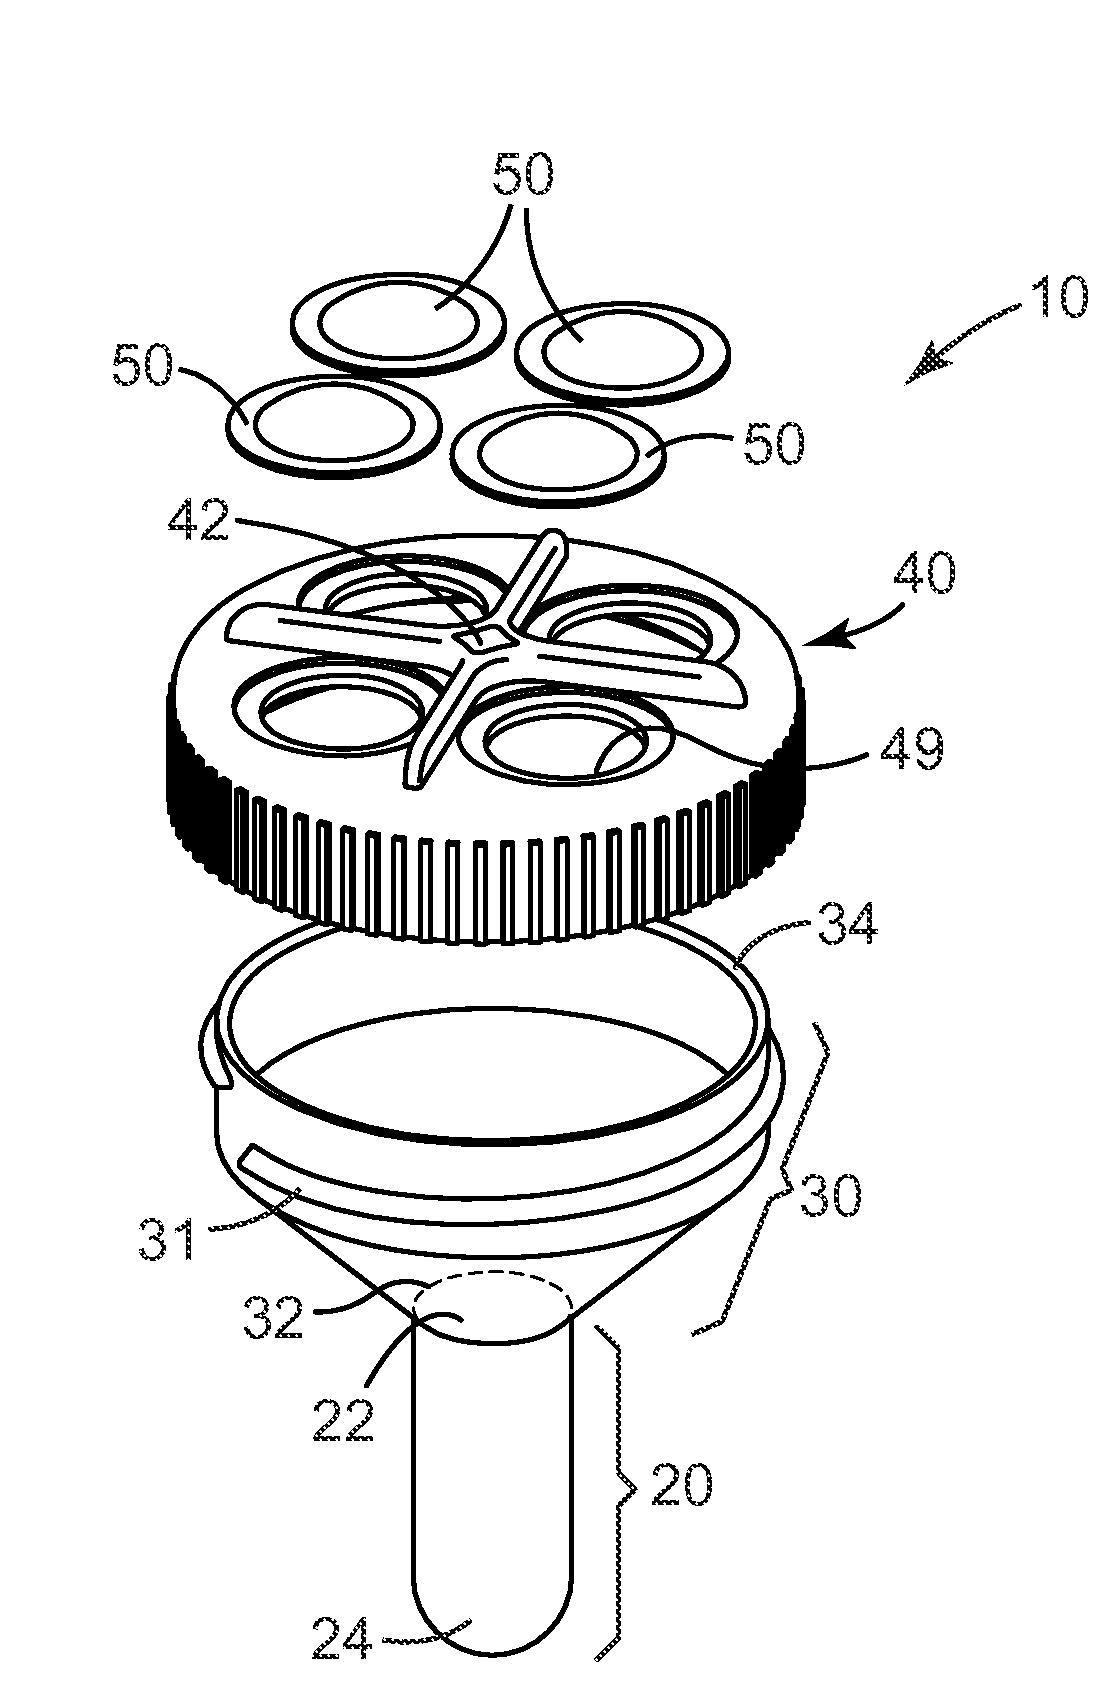 Devices and methods for dispensing reagents into samples